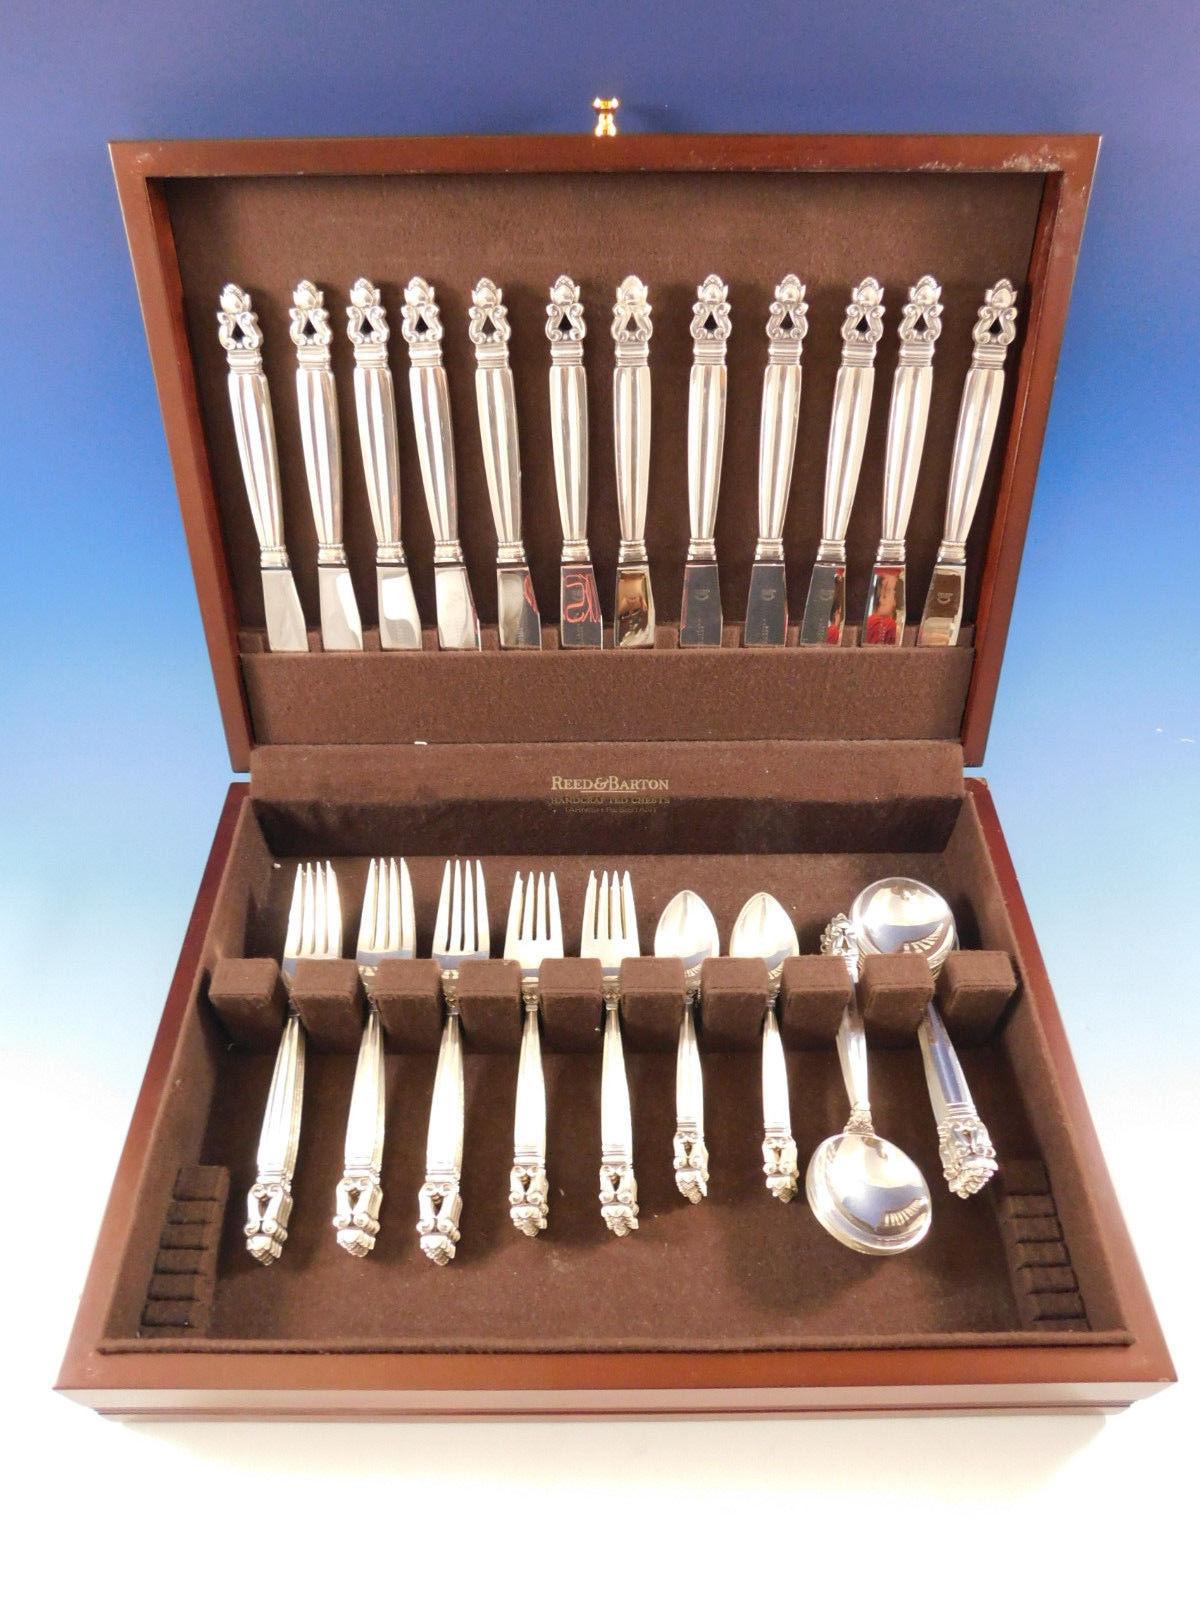 Acorn by Georg Jensen sterling silver dinner size flatware set - 60 pieces. This set includes:

12 dinner knives, long handle, 9